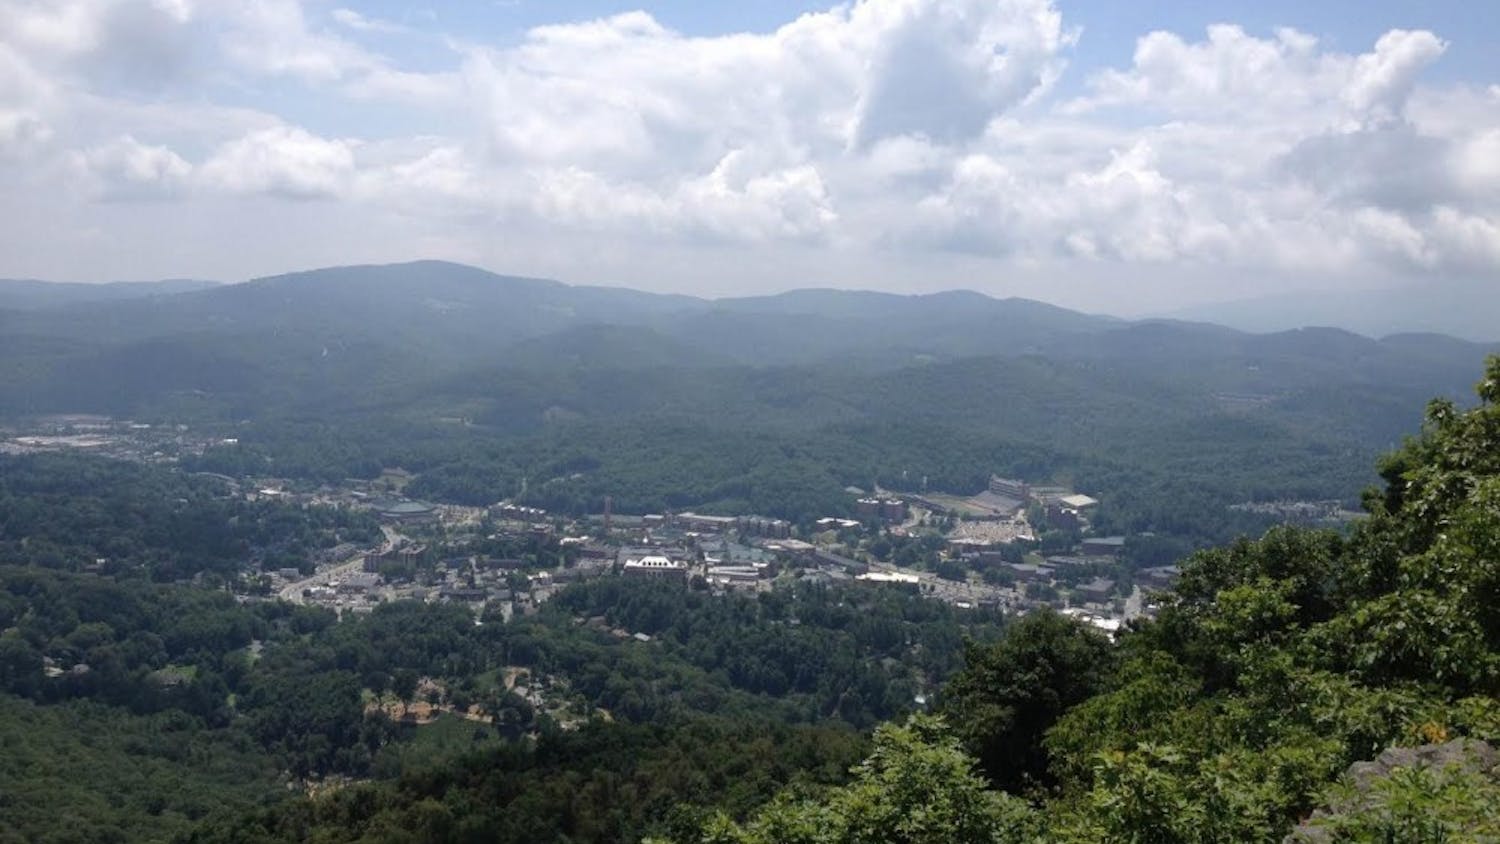 Mount Airy is surrounded by the Blue Ridge mountains and has hiking trails, various food options and a rich history.